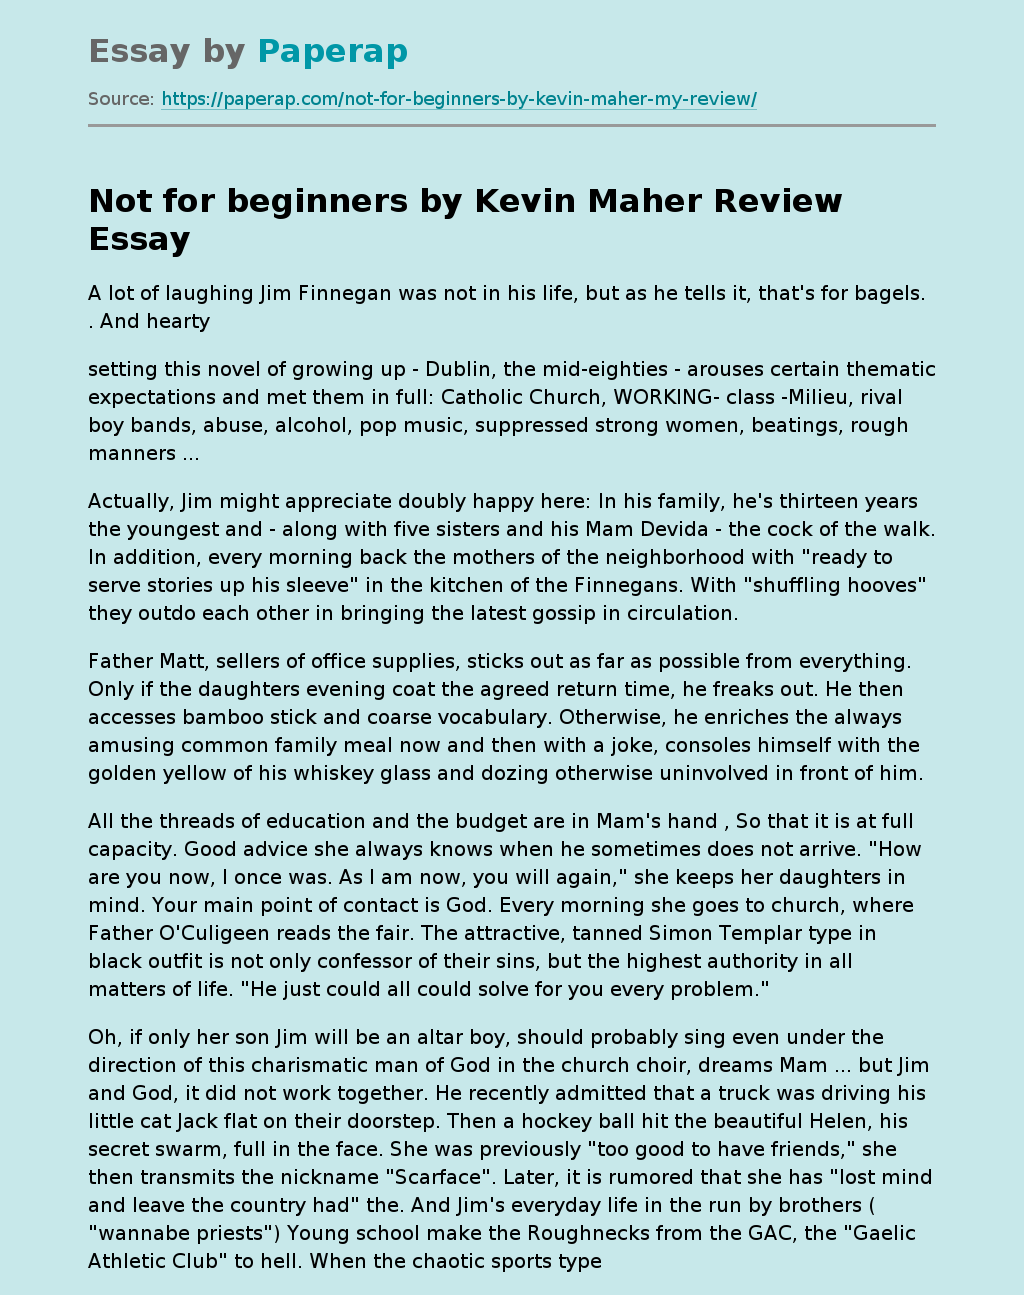 Not for beginners by Kevin Maher Review